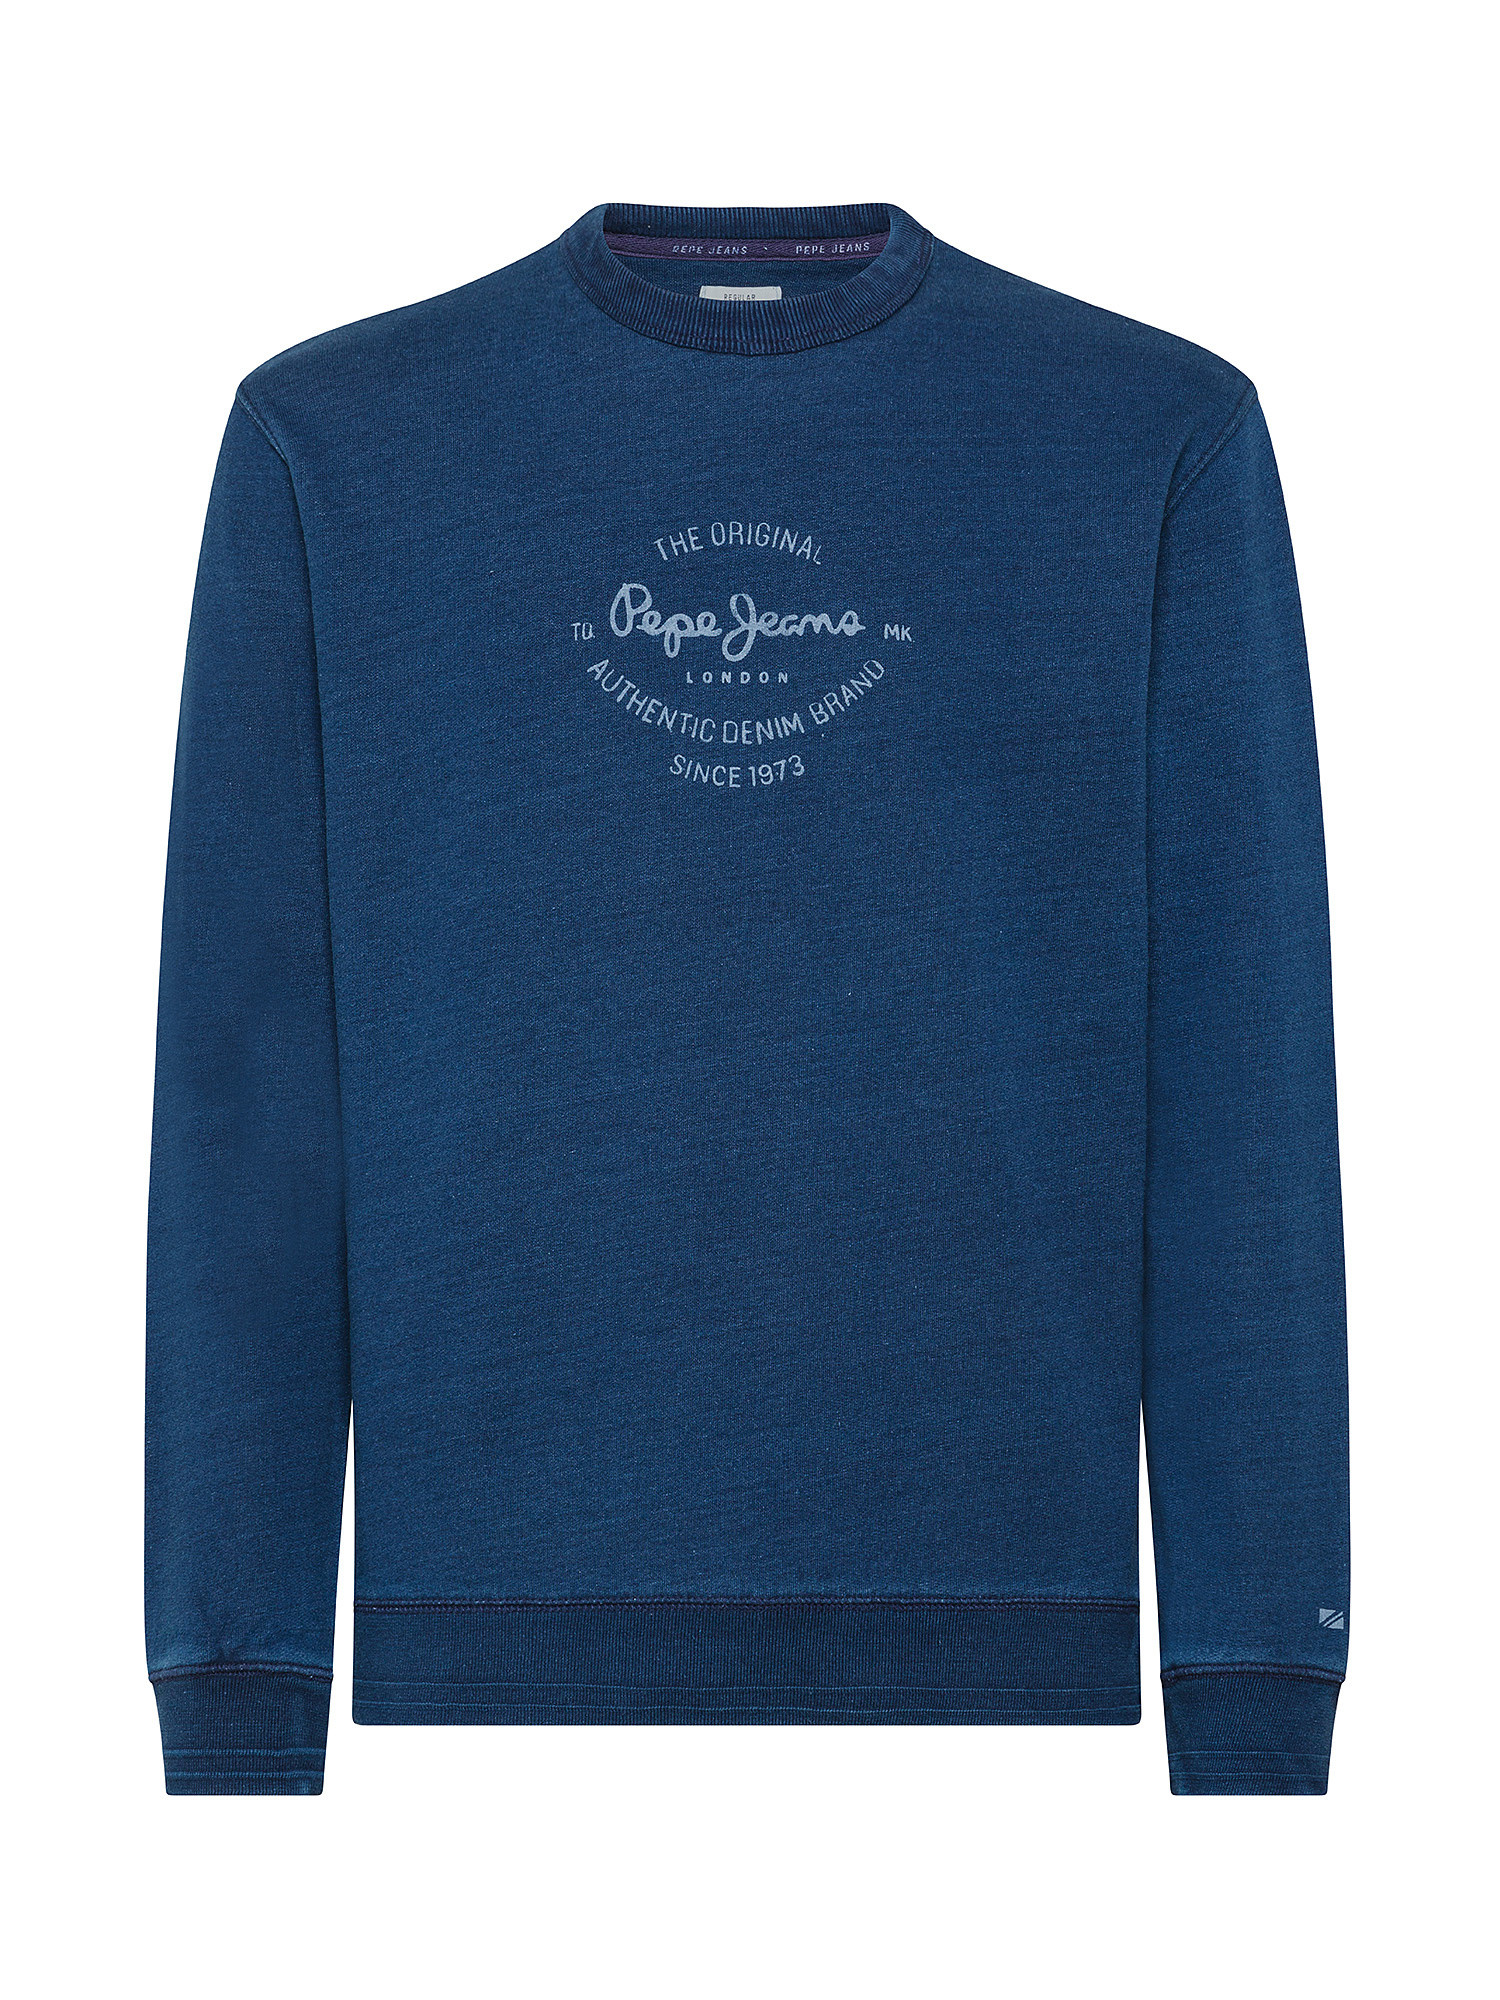 Pepe Jeans - Sweatshirt with logo in cotton, Royal Blue, large image number 0